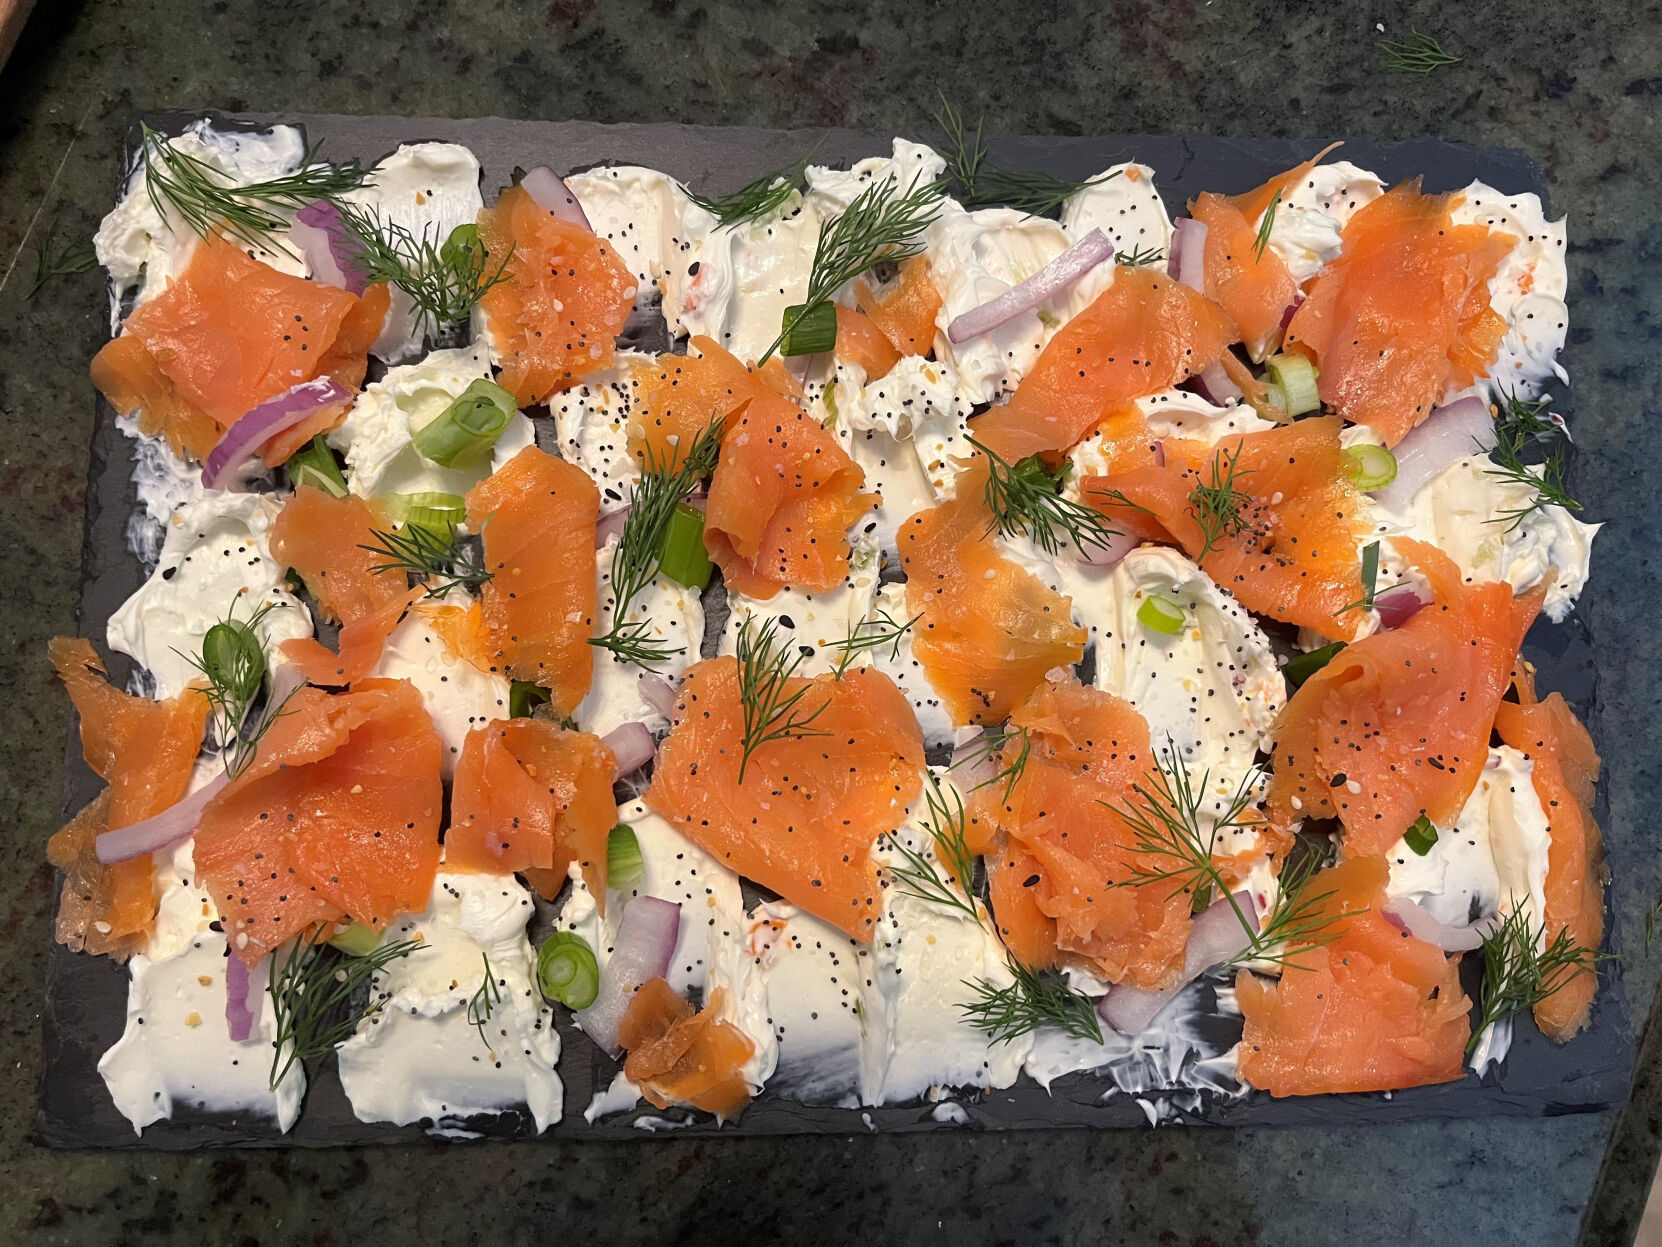 <p>This October 2022 photo shows a cream cheese and smoked salmon board created by Suzie Cornell in Boca Raton, Fla. Butter boards have become the polarizing stepchild of charcuterie boards. (Suzie Cornell via AP)</p>   PHOTO CREDIT: Uncredited - honsx, Sizie Cornell